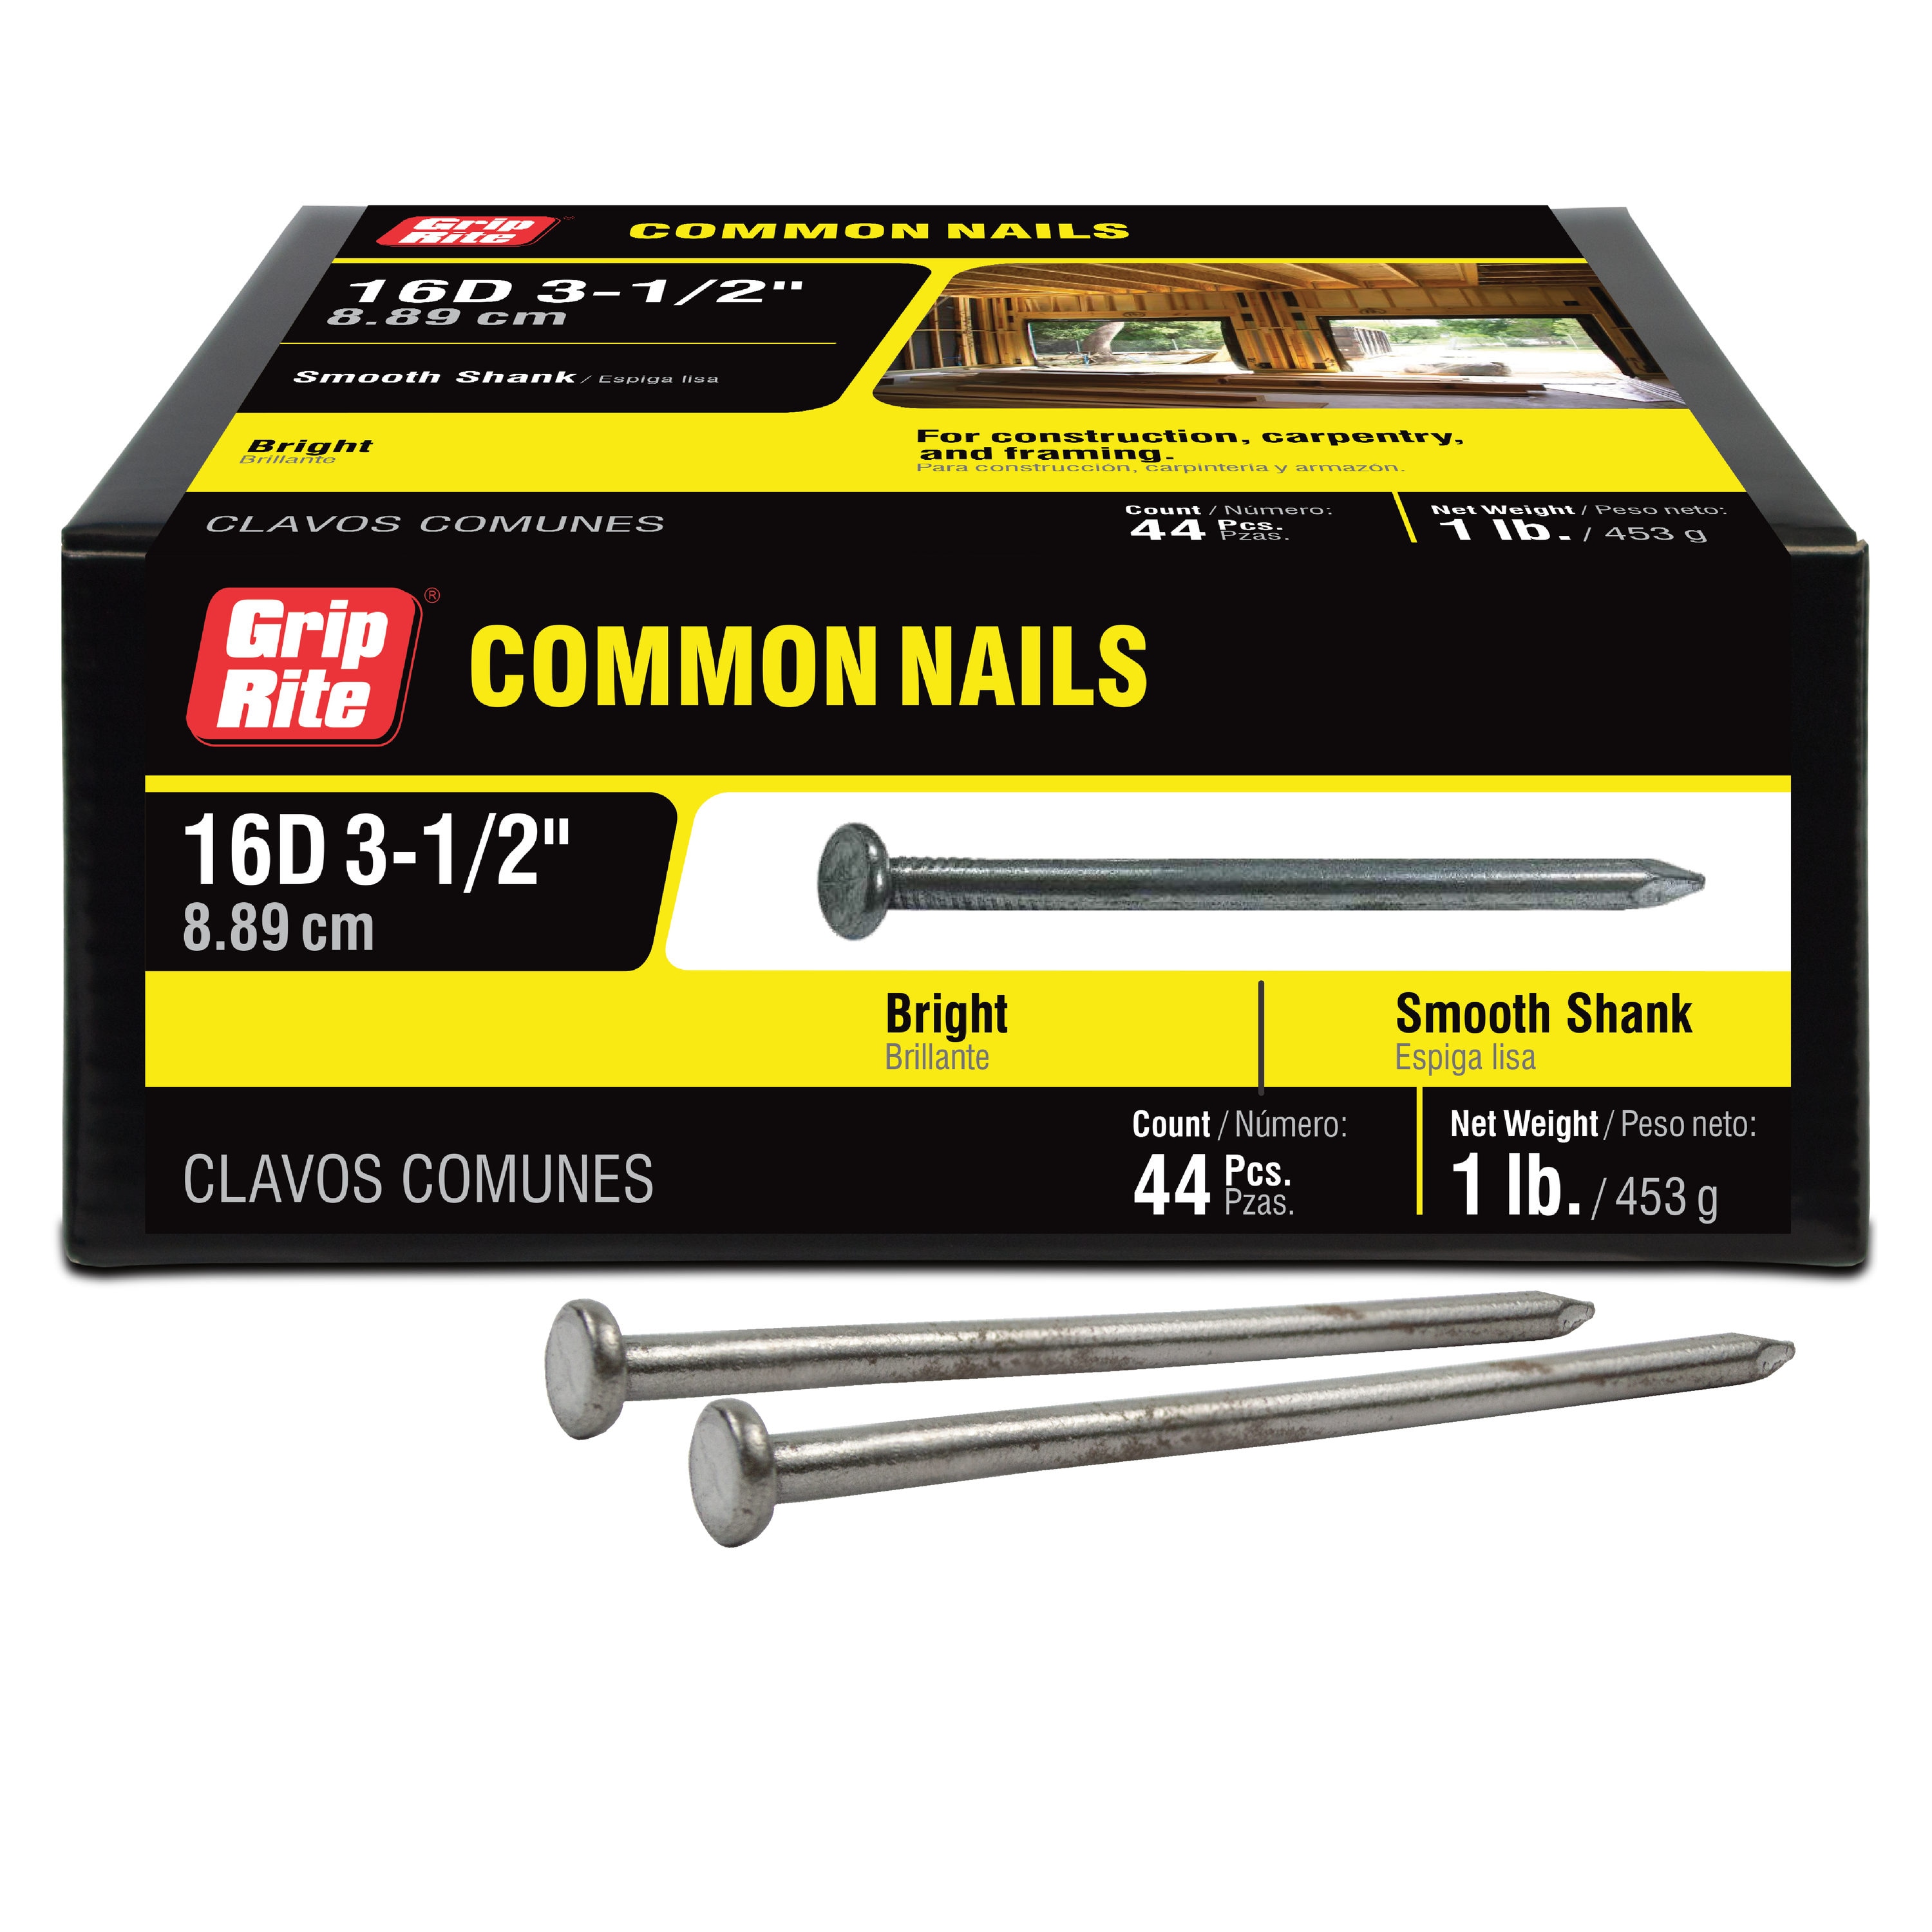 ORGILL HARDWARE Pro-Fit 16D 3-1/2 in. 31 Common Hot-Dipped Galvanized Steel  Nail 1 lb | Celebration Hardware